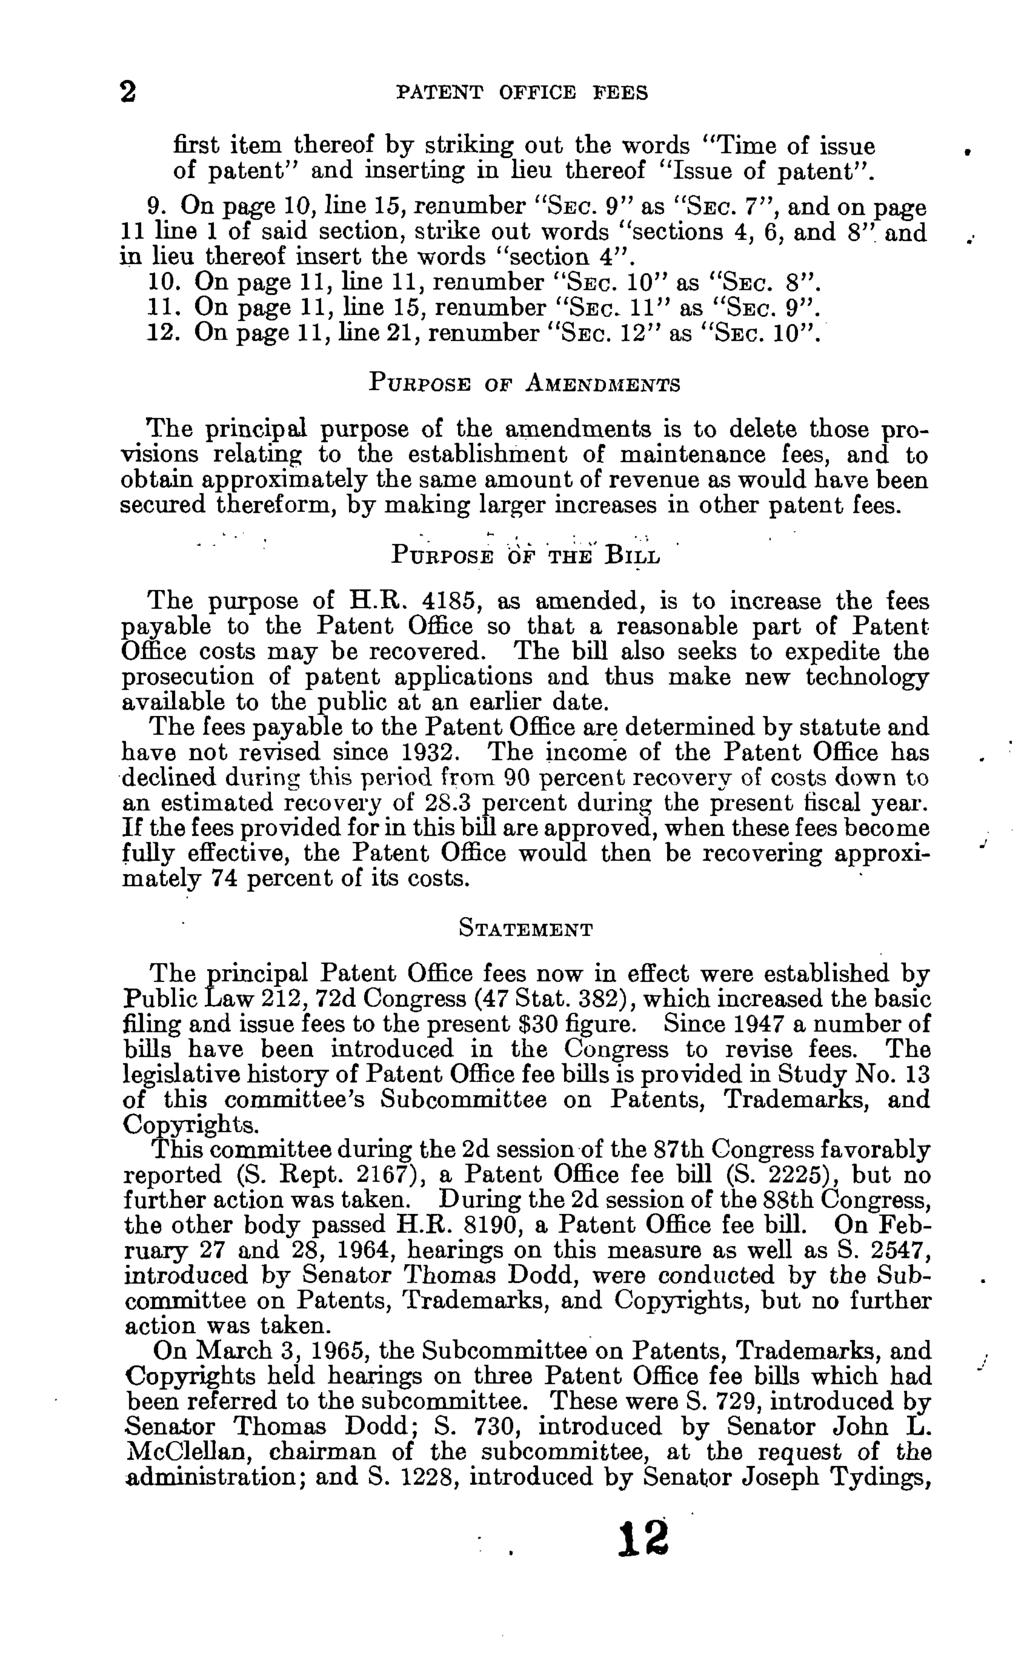 2 PATENT OFFICE FEES first item thereof by striking out the words "Time of issue of patent" and inserting in lieu thereof "Issue of patent". 9. On page 10, line 15, renumber "SEC. 9" as "SEC.